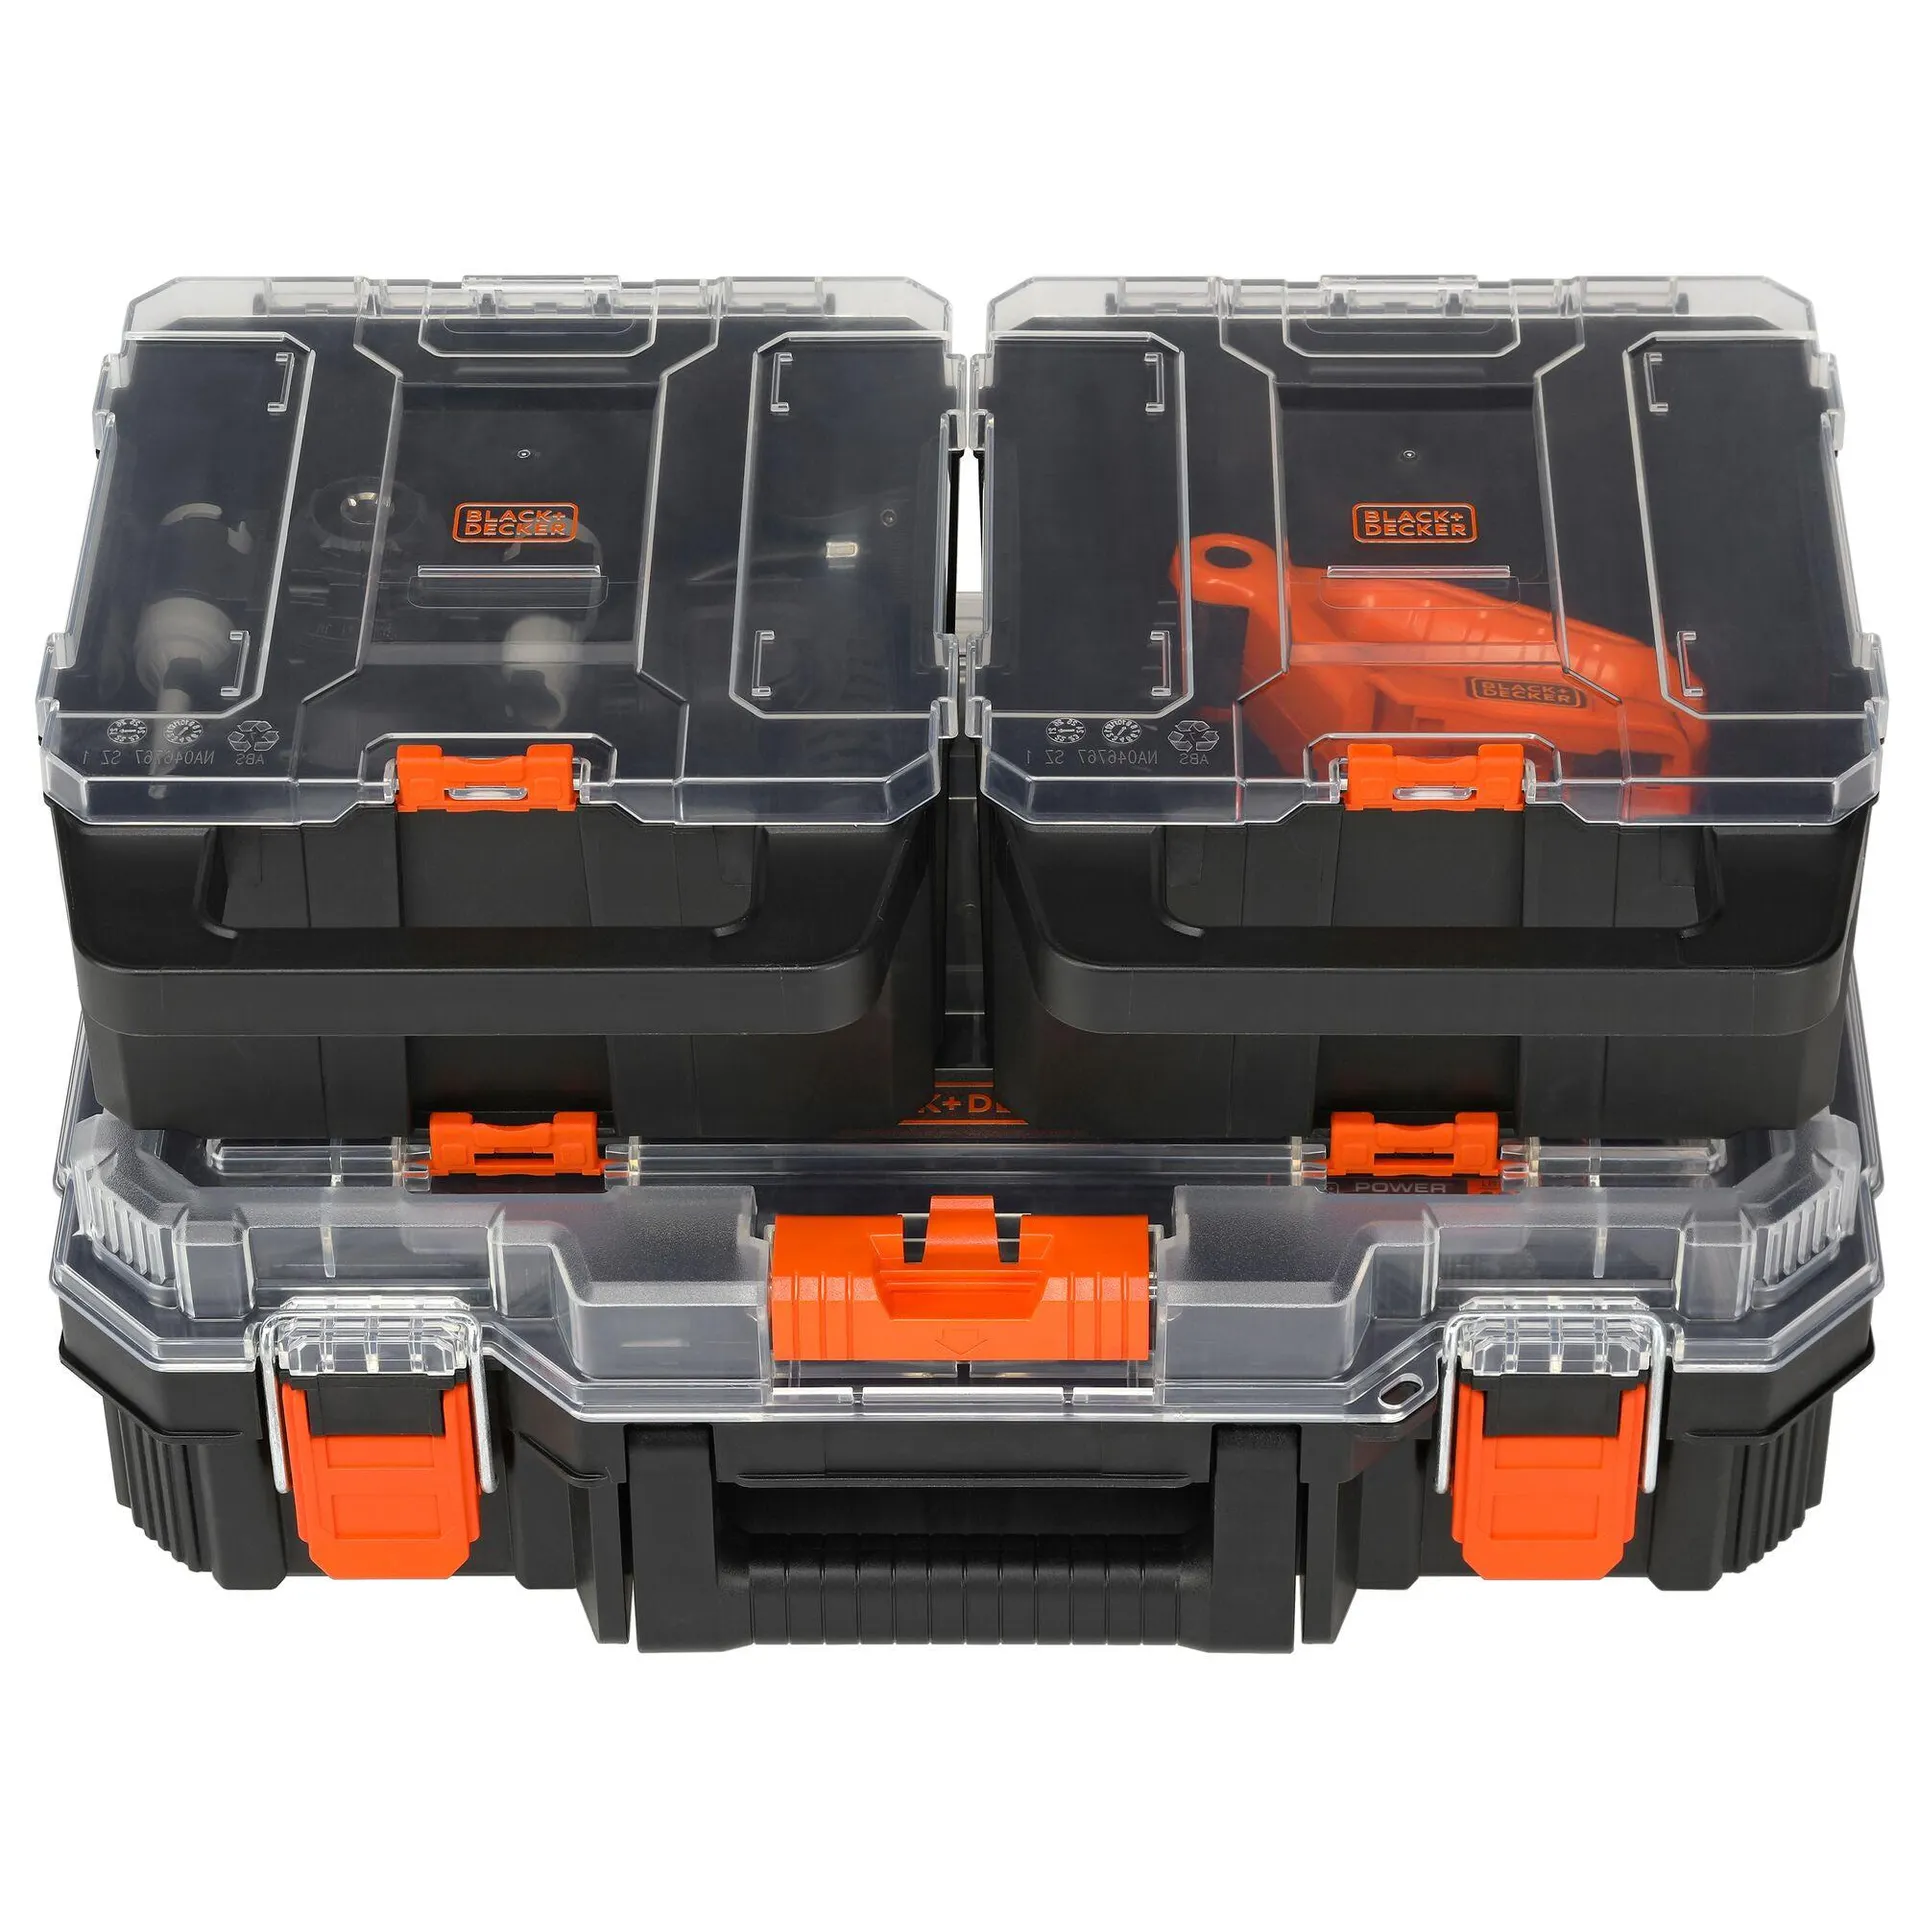 MATRIX™ 20V MAX* Power Tool Kit, Includes Cordless Drill, 8 Attachments and Storage Case